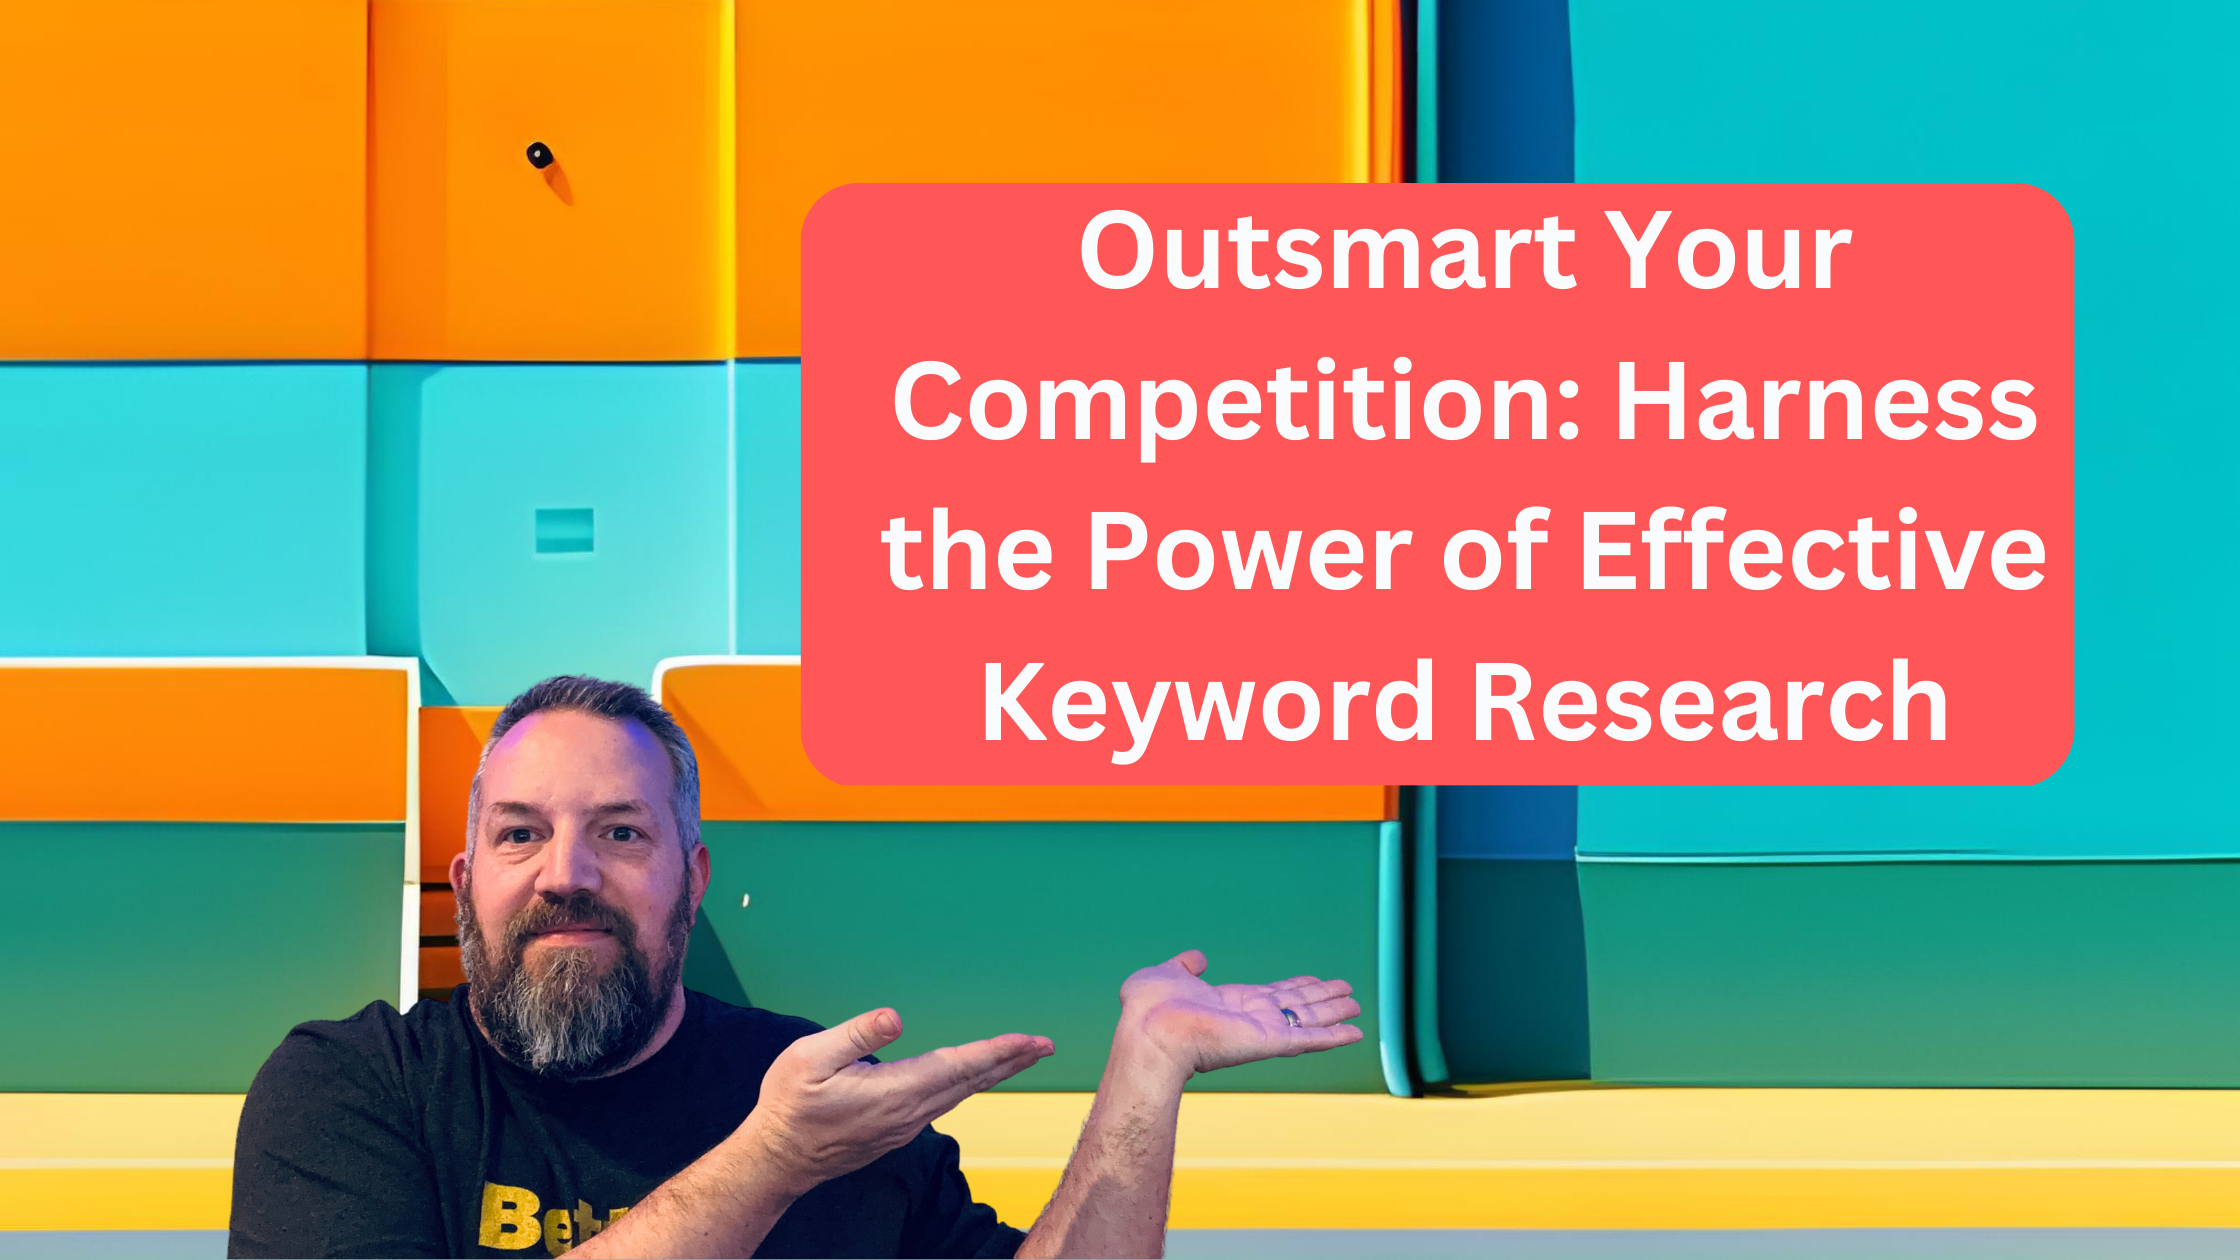 Outsmart Your Competition: Harness the Power of Effective Keyword Research